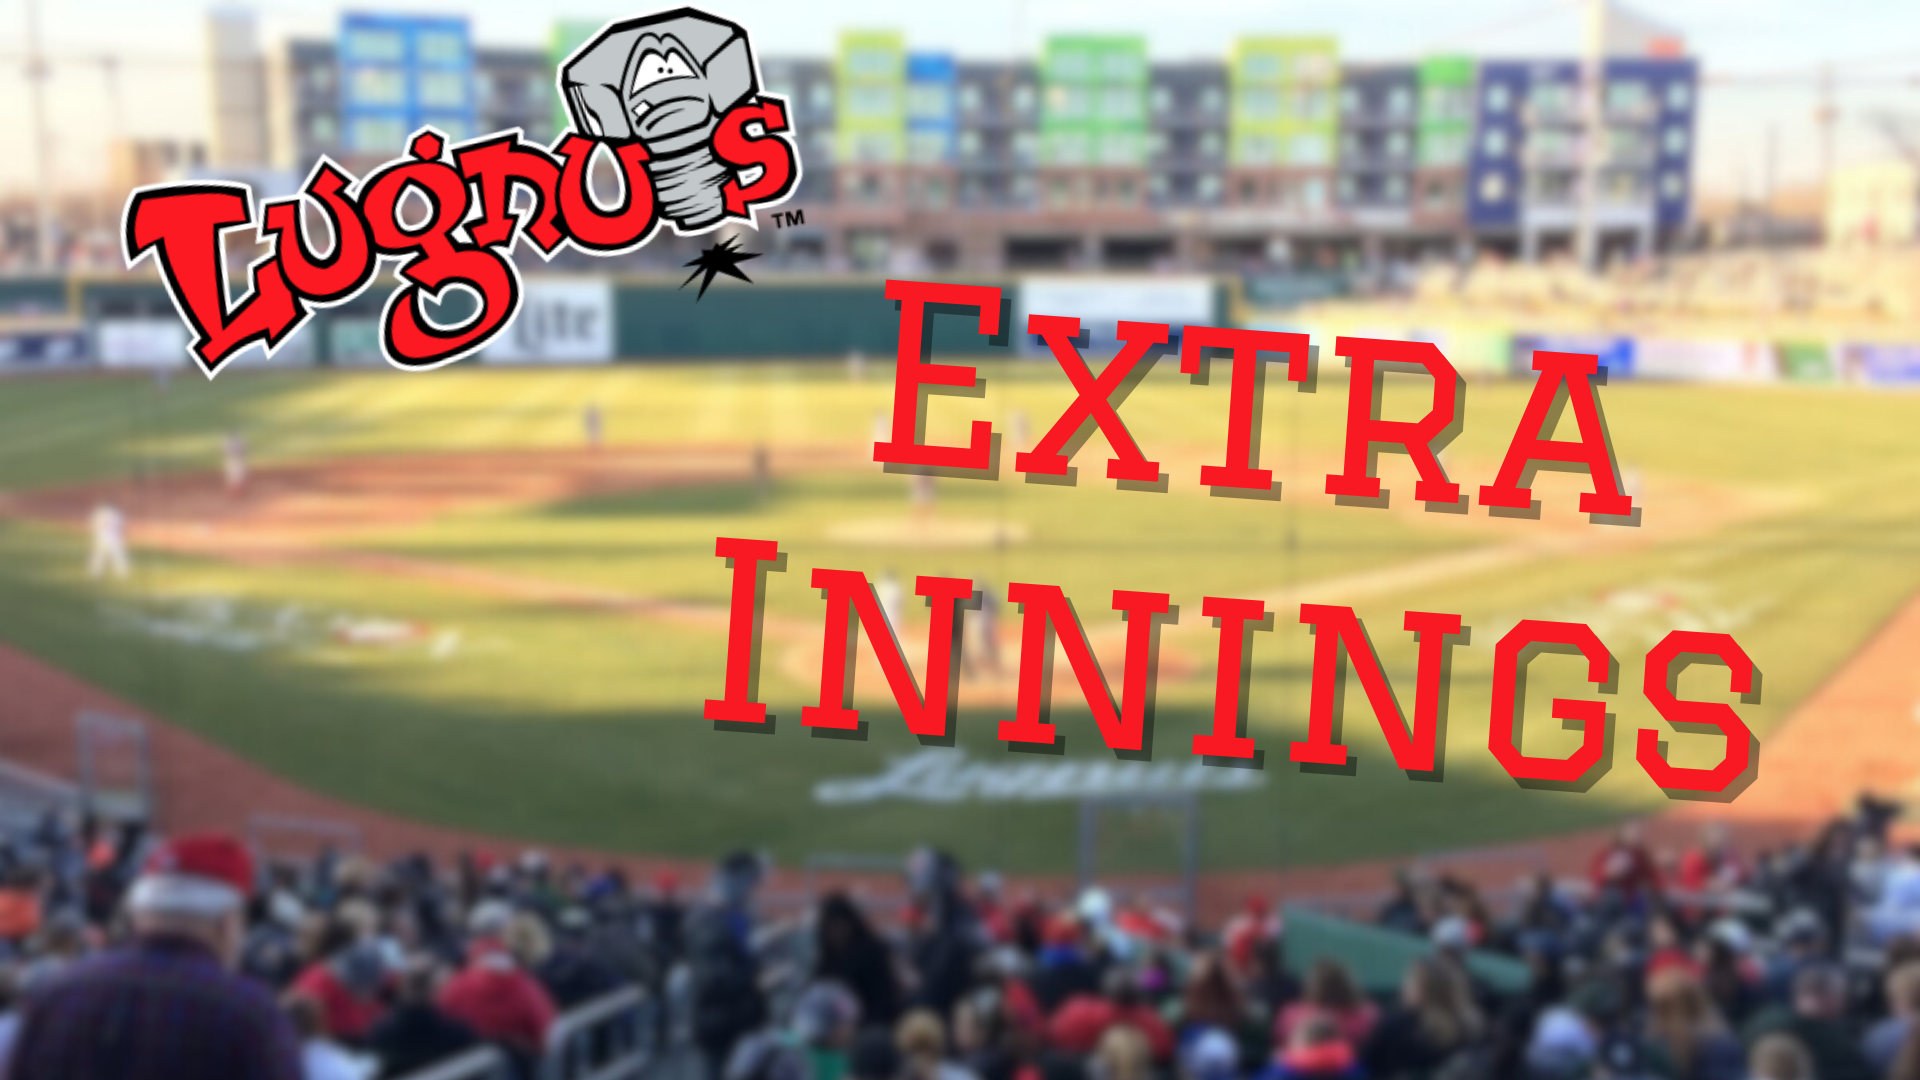 See the former Lansing Lugnuts that have been named MLB all-stars